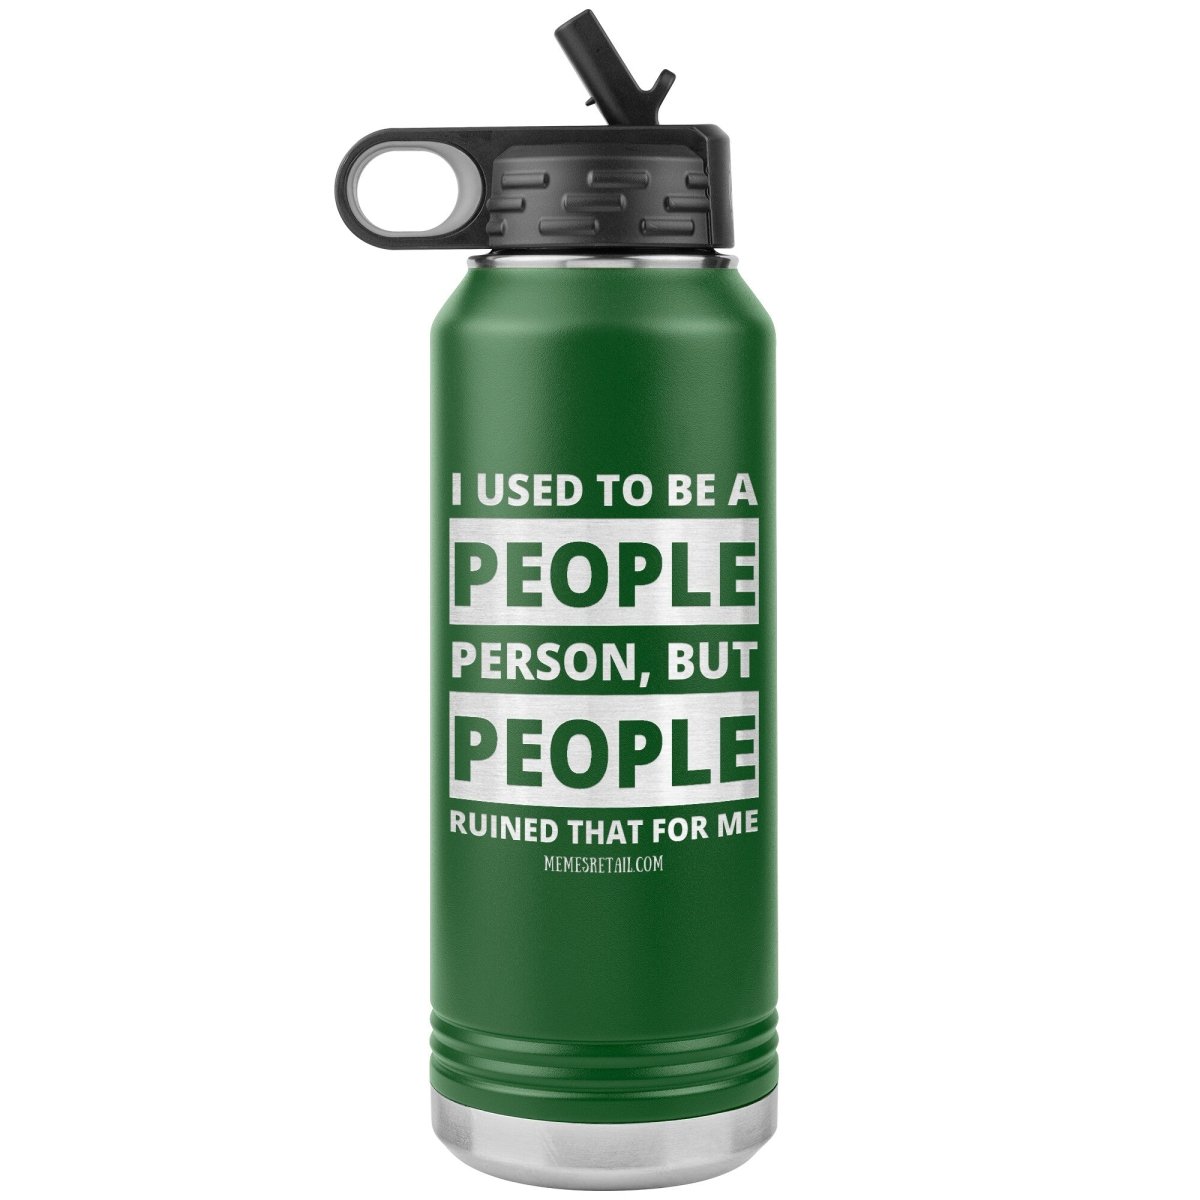 I Used To Be A People Person, But People Ruined That For Me 32 oz Water Tumbler, Green - MemesRetail.com